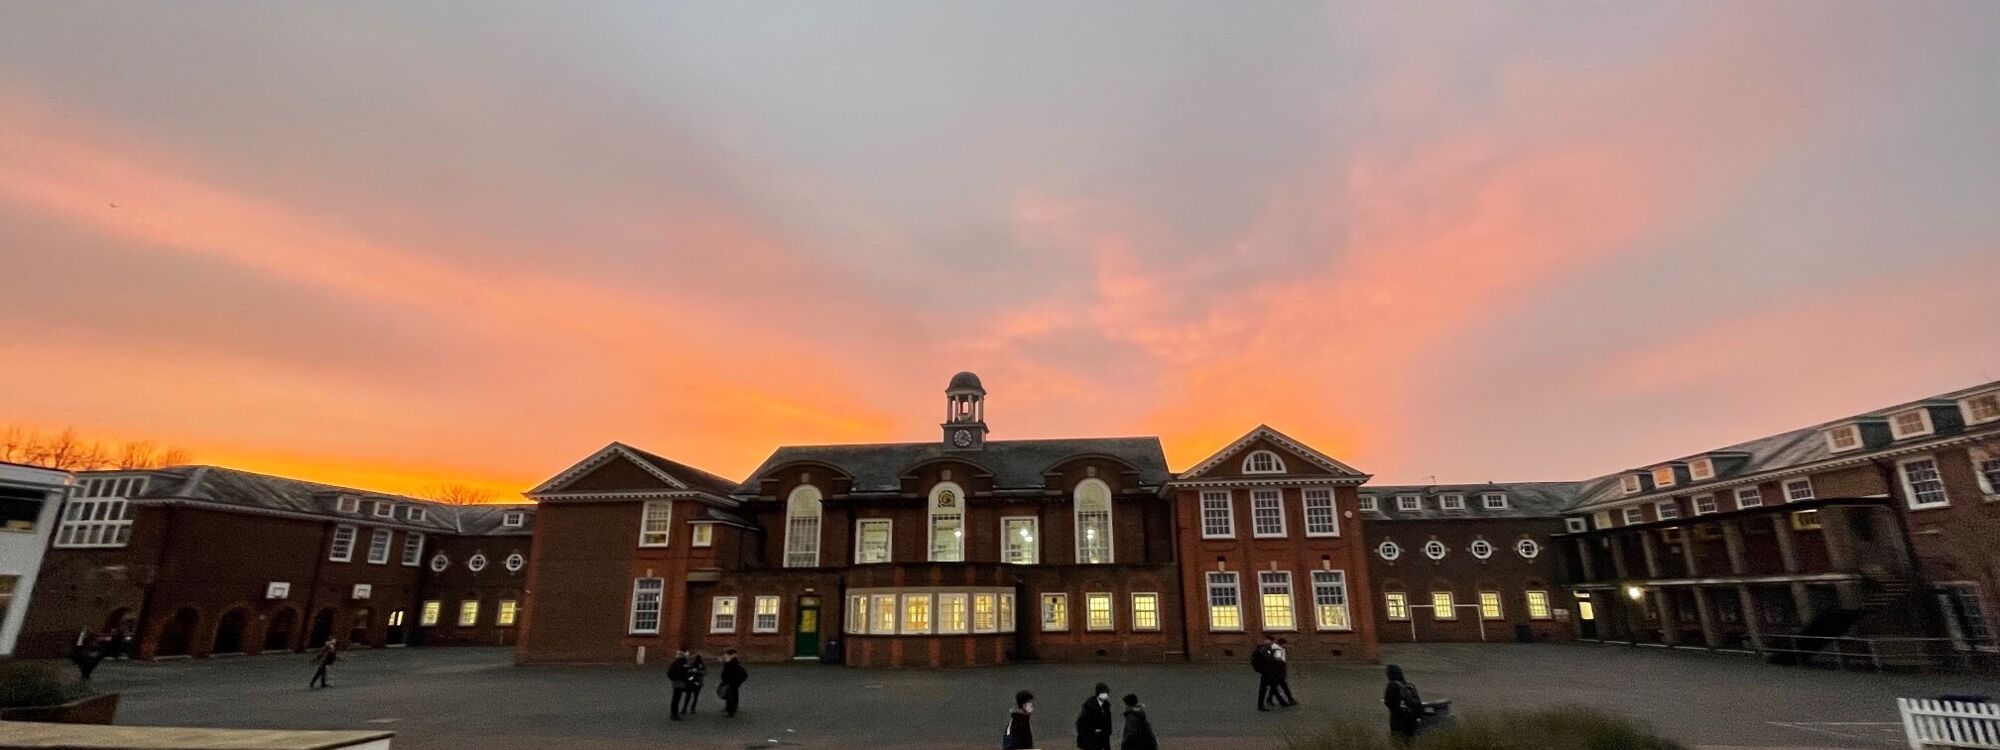 Sunrise School exterior from The Quad   January 2022 5